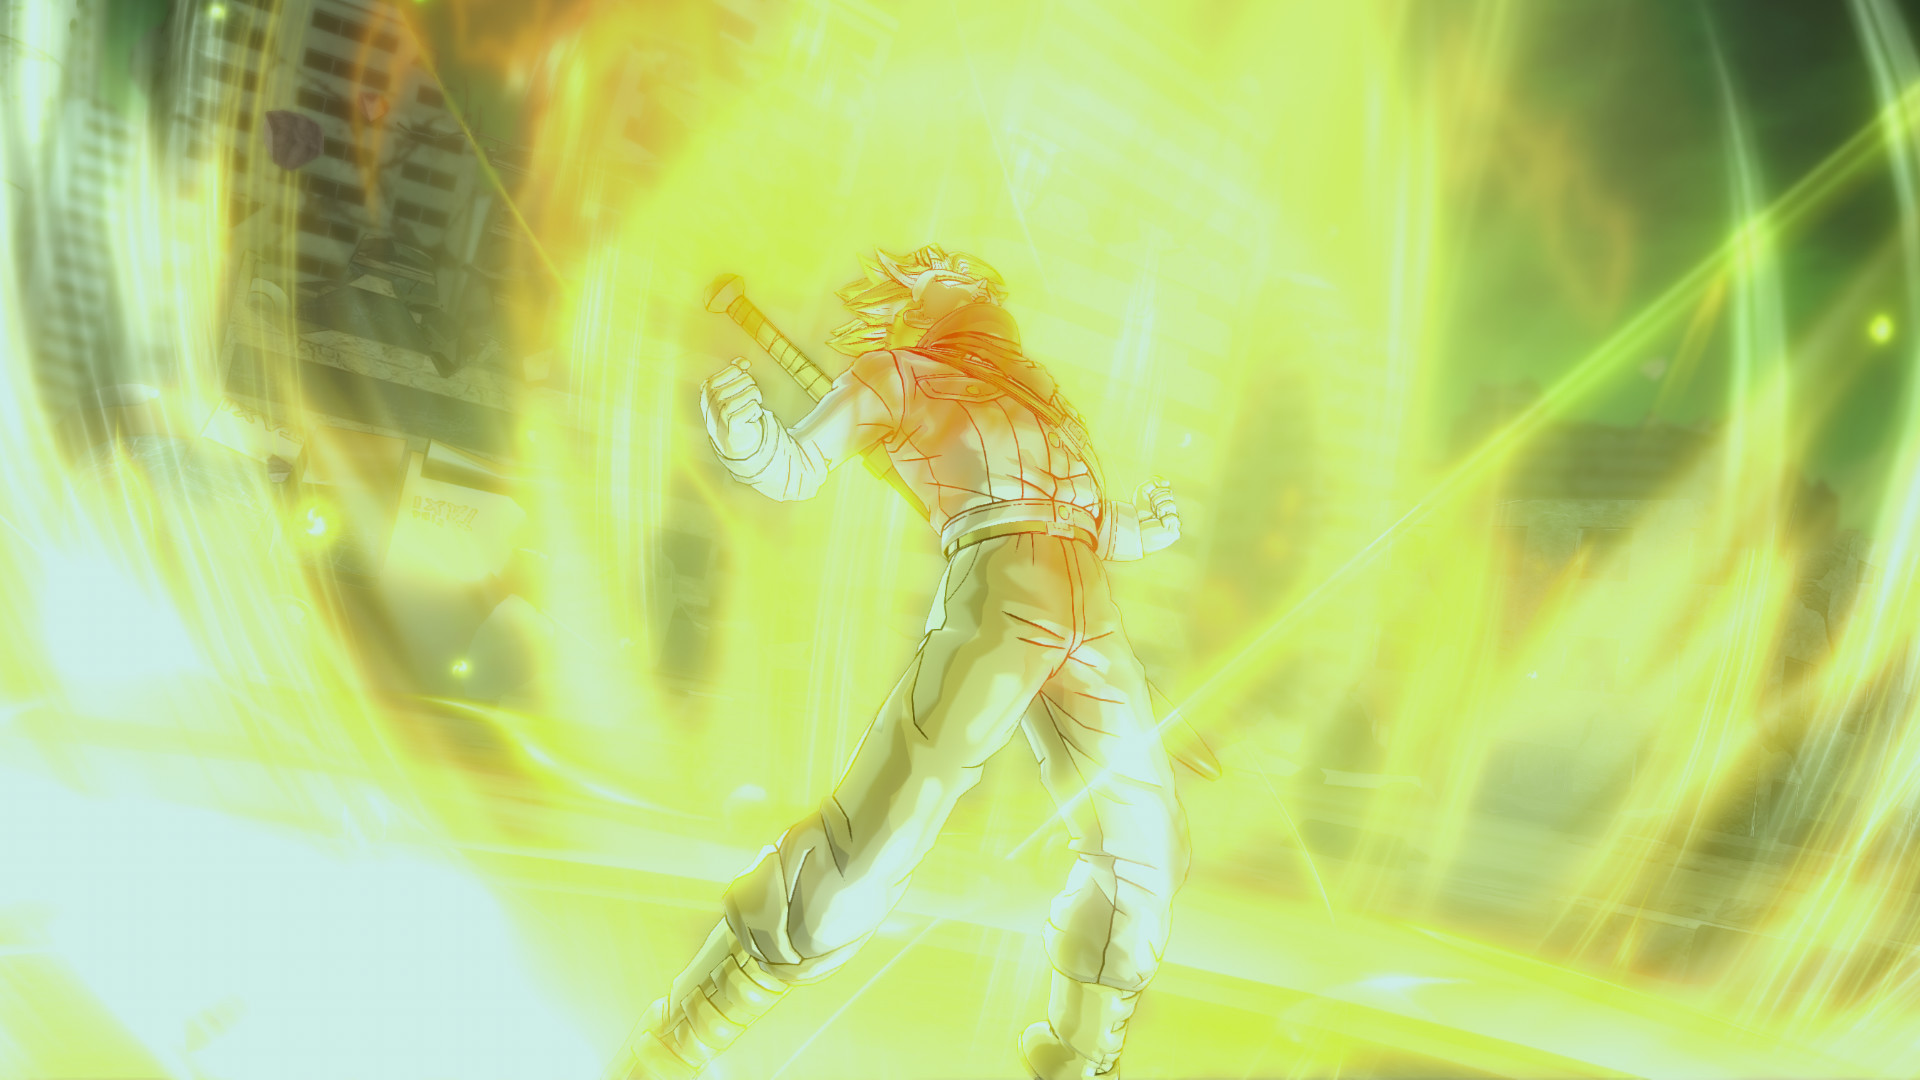 Dragon Ball Xenoverse 2 - DB Super Pack 4 Details, Videos, and Release Date